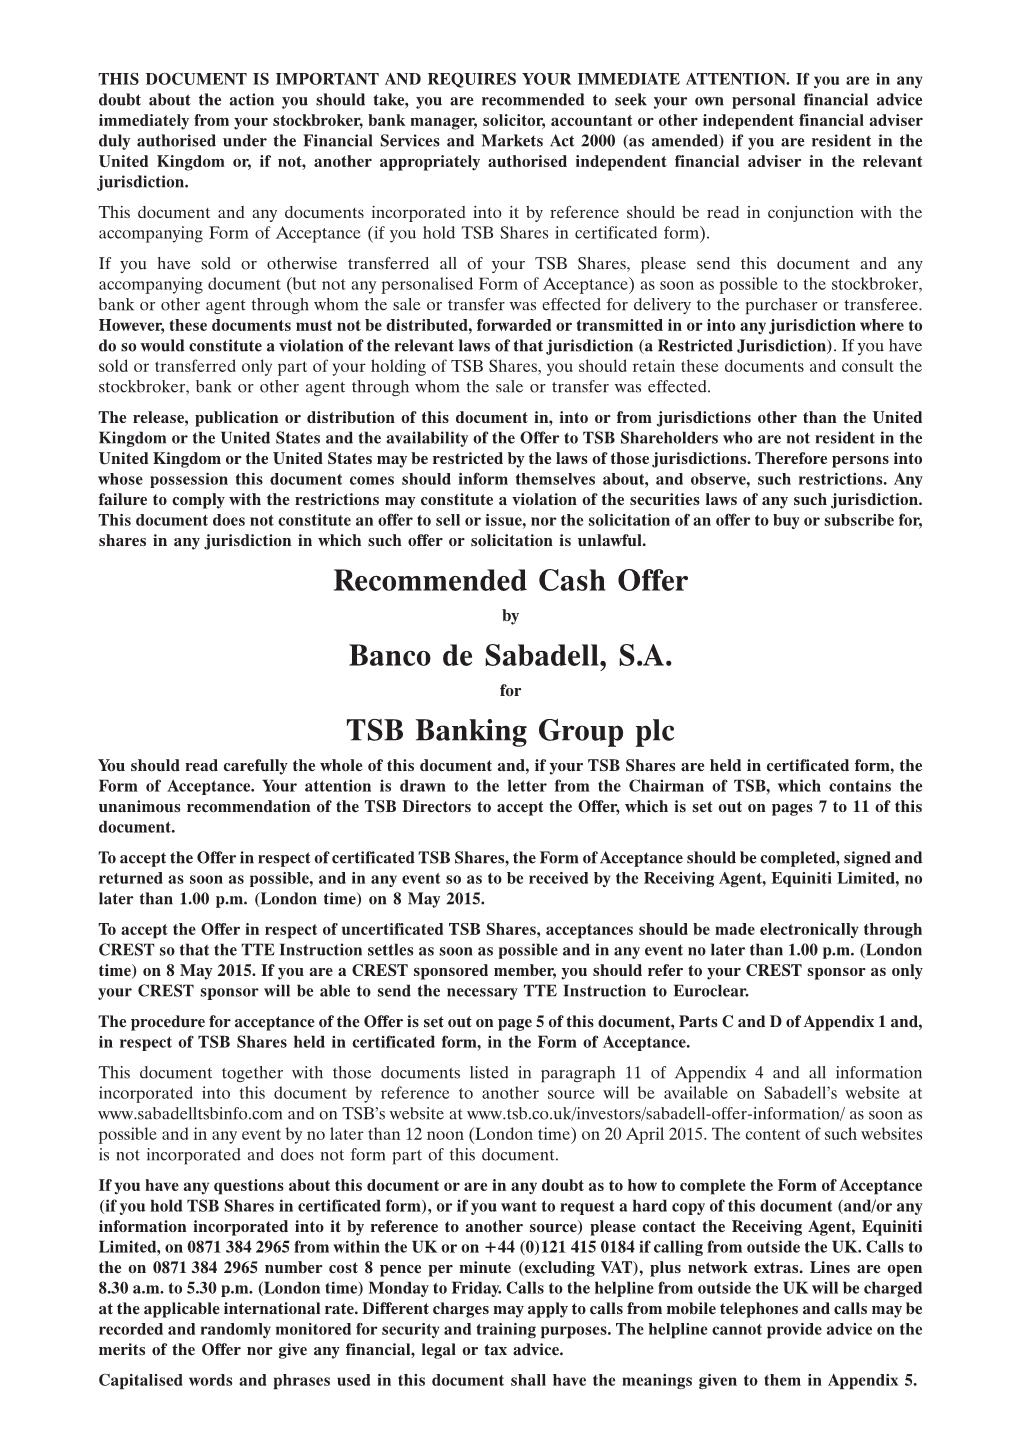 Recommended Cash Offer Banco De Sabadell, S.A. TSB Banking Group